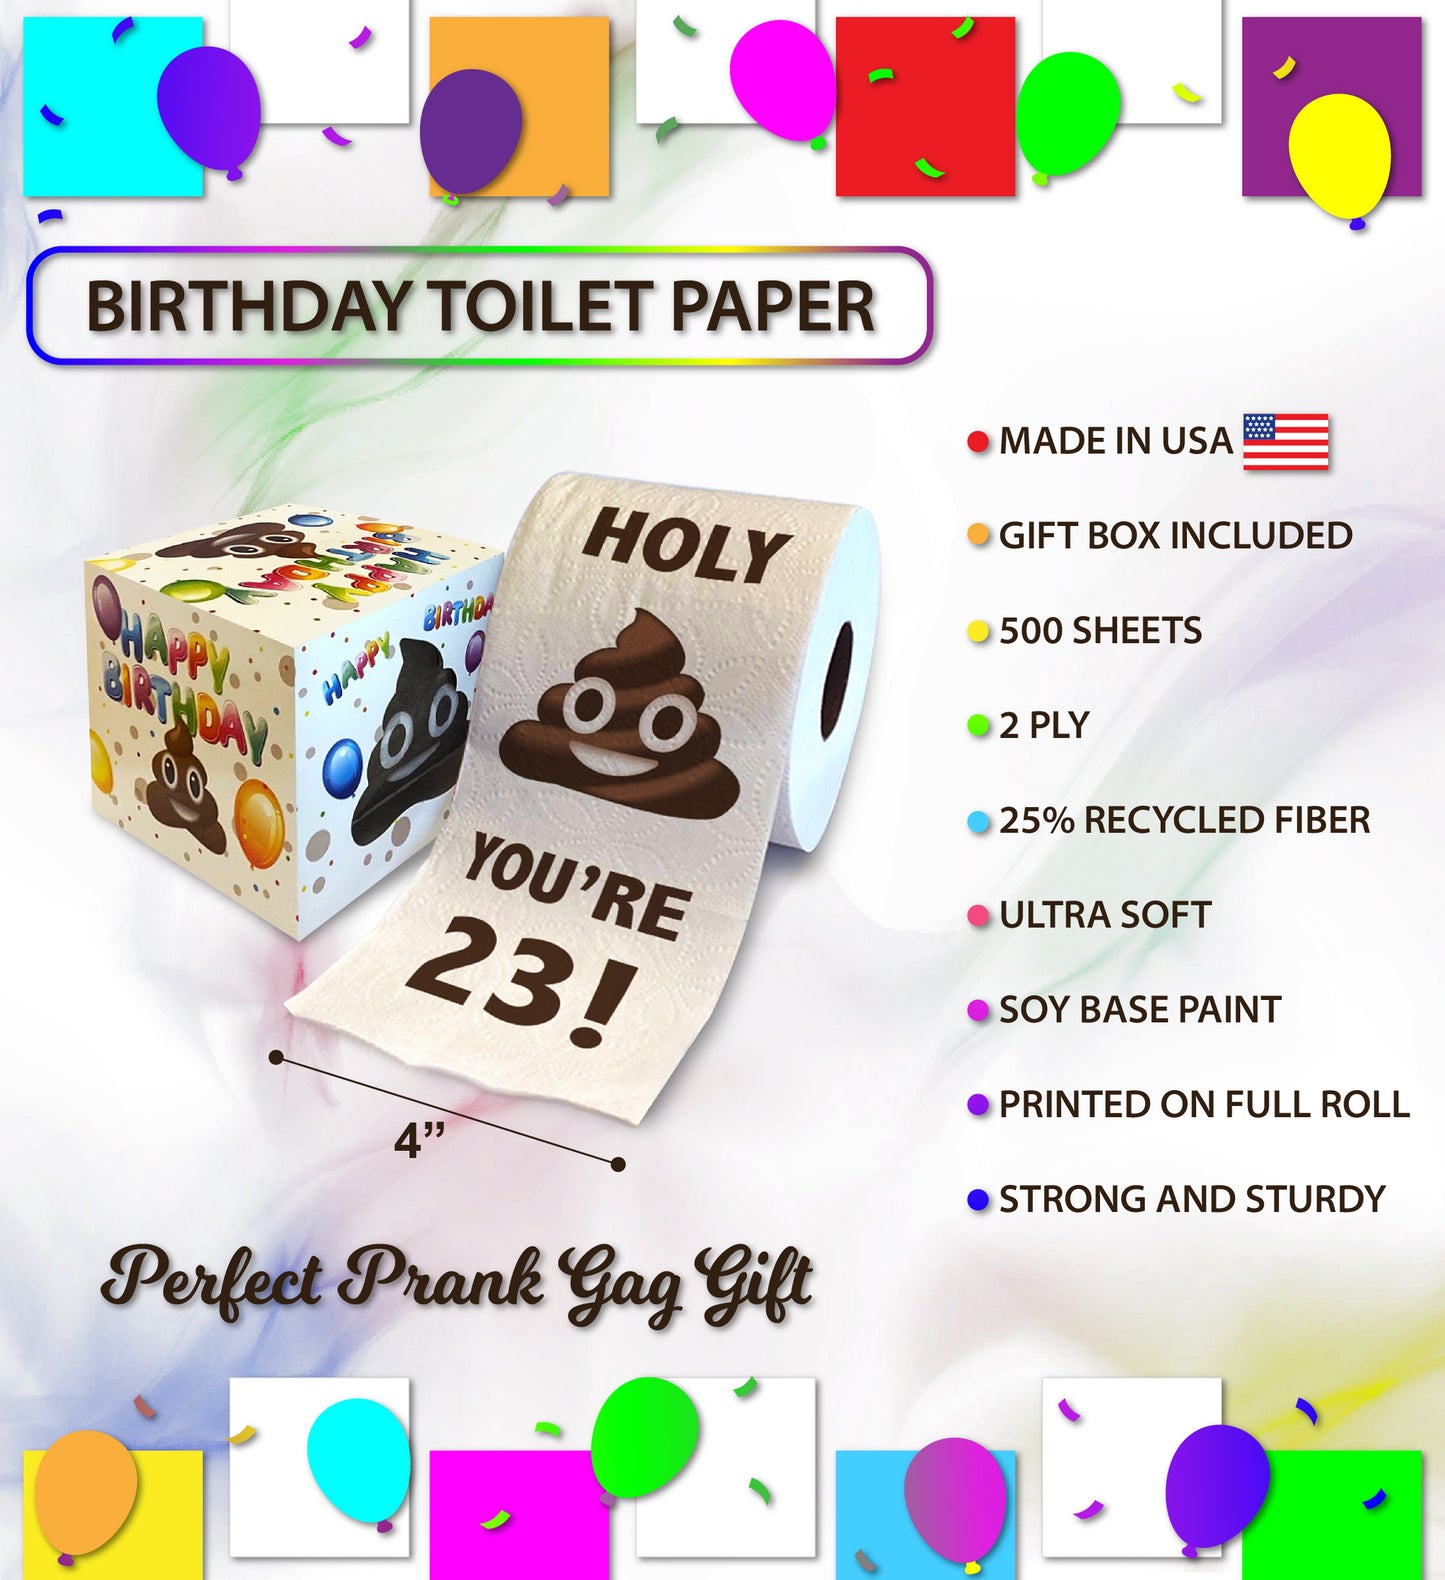 Printed TP Holy Poop You're 23 Printed Toilet Paper Funny Gag Gift – 500 Sheets